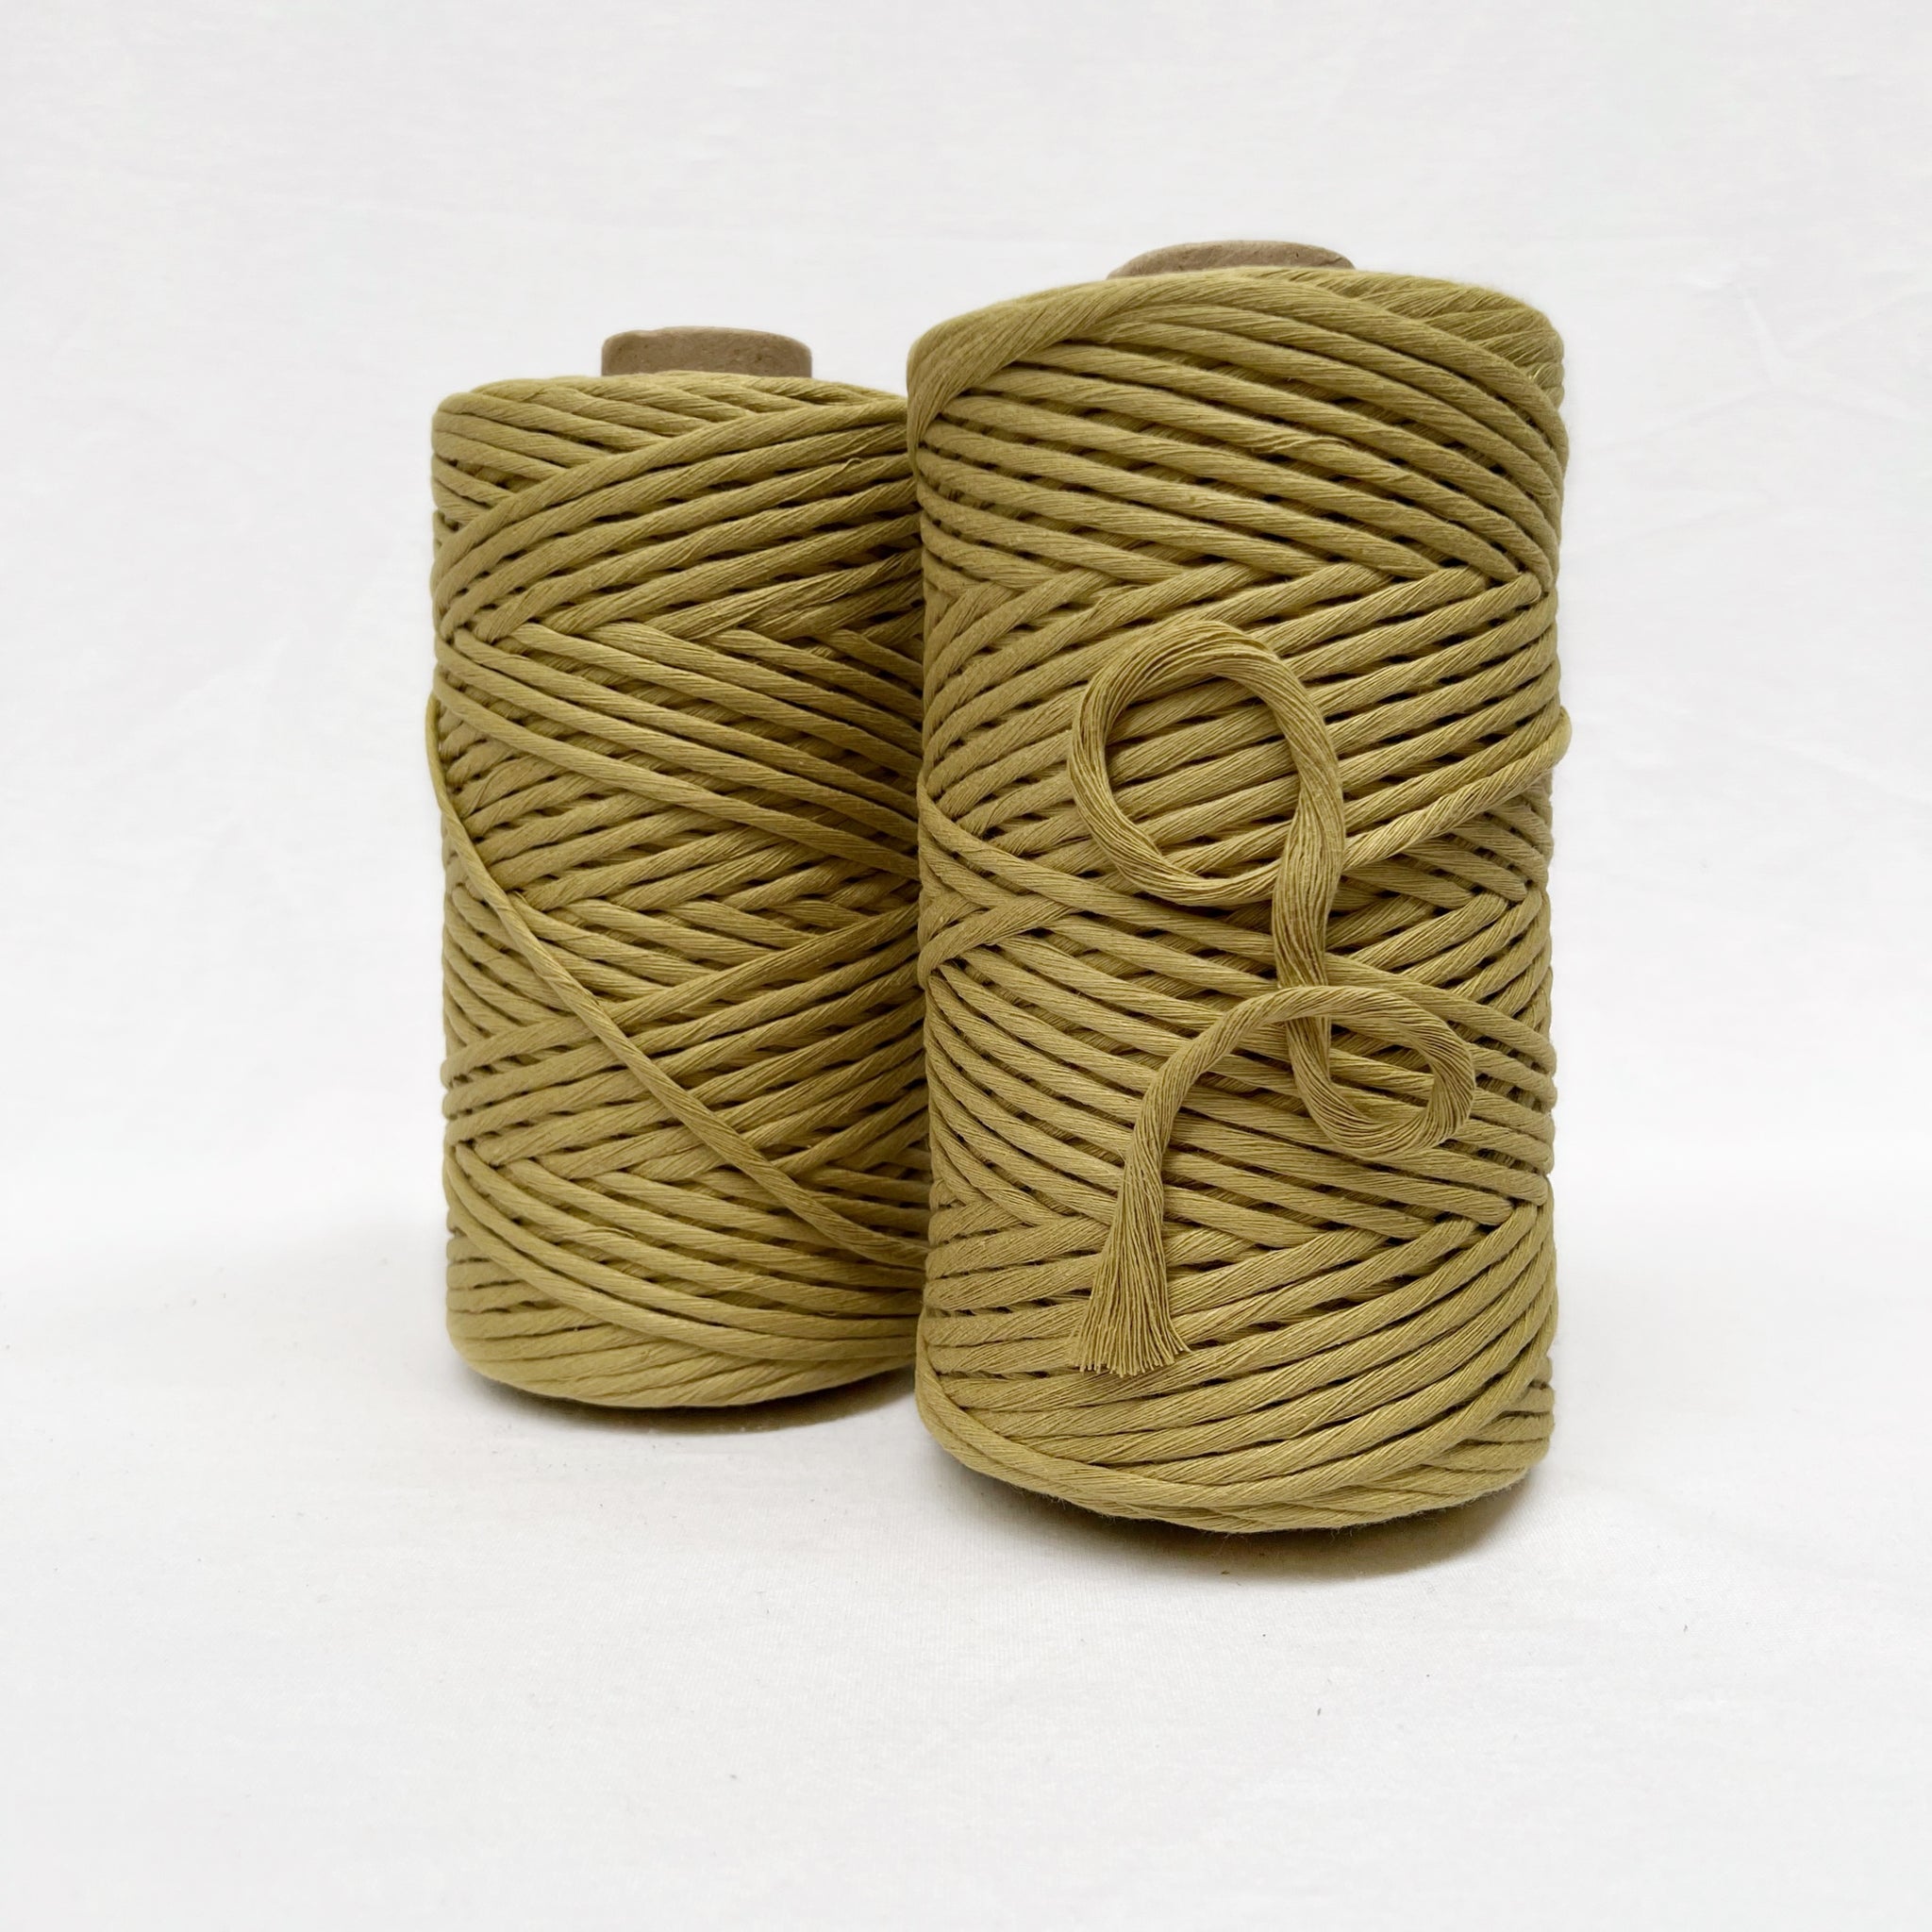 Recycled Luxe Macrame String // Coral - Mary Maker Studio - Macrame &  Weaving Supplies and Education.